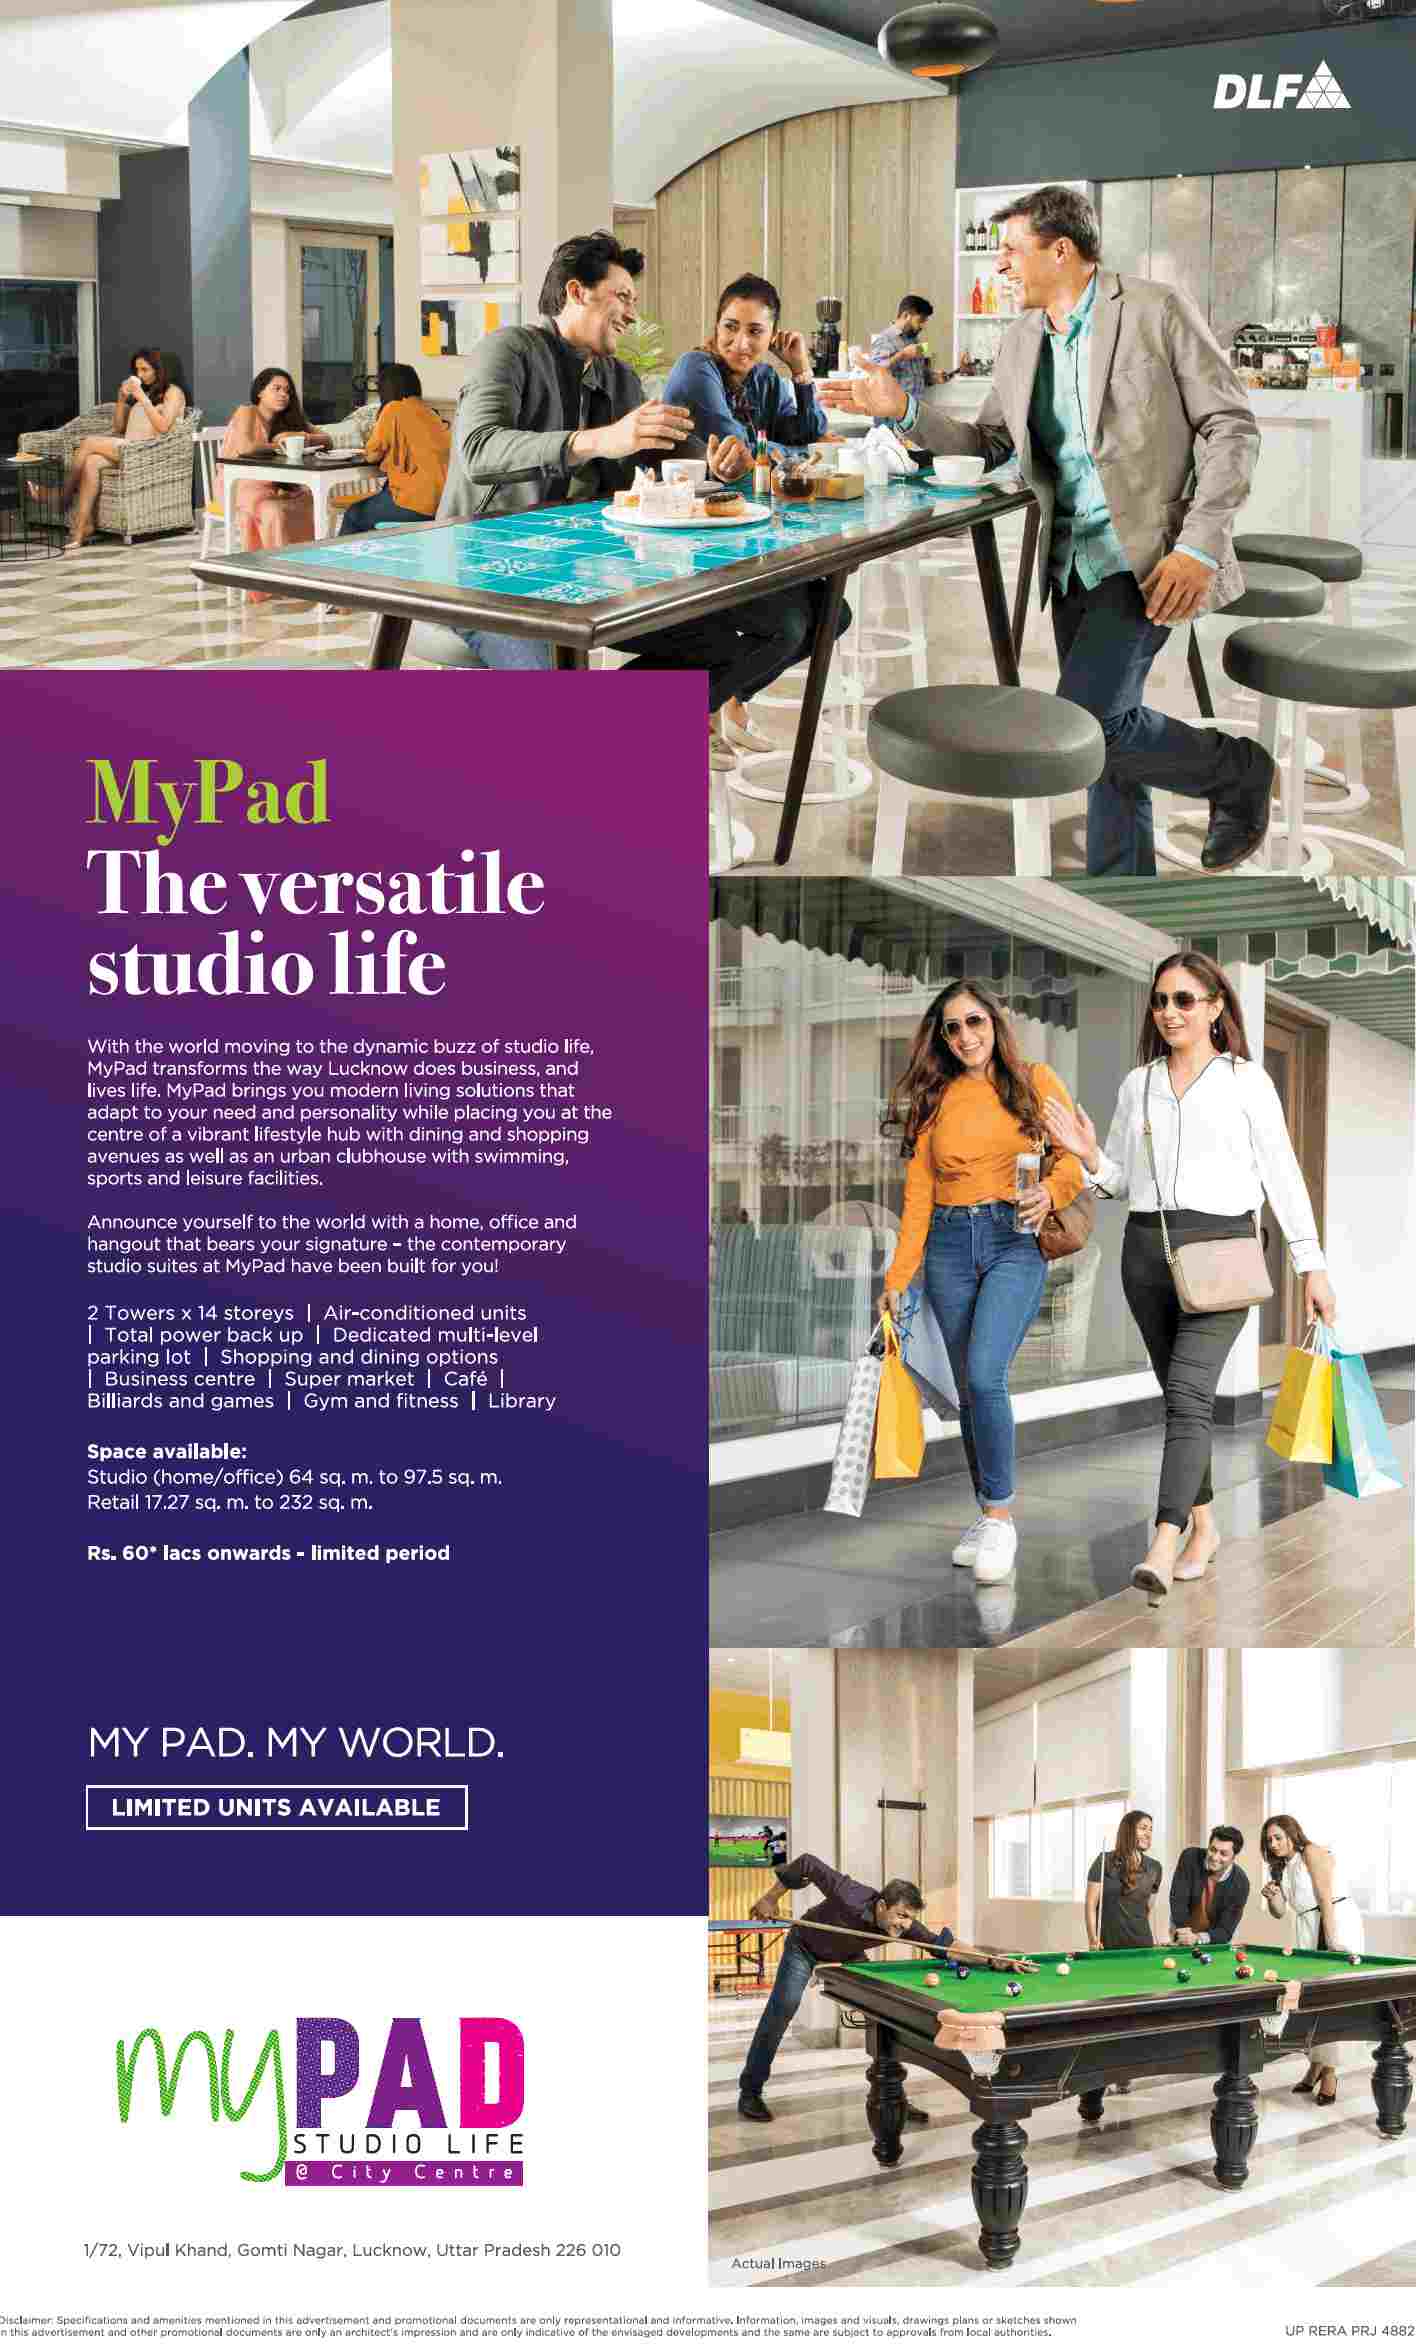 Experience the versatile studio life at DLF My Pad in Lucknow